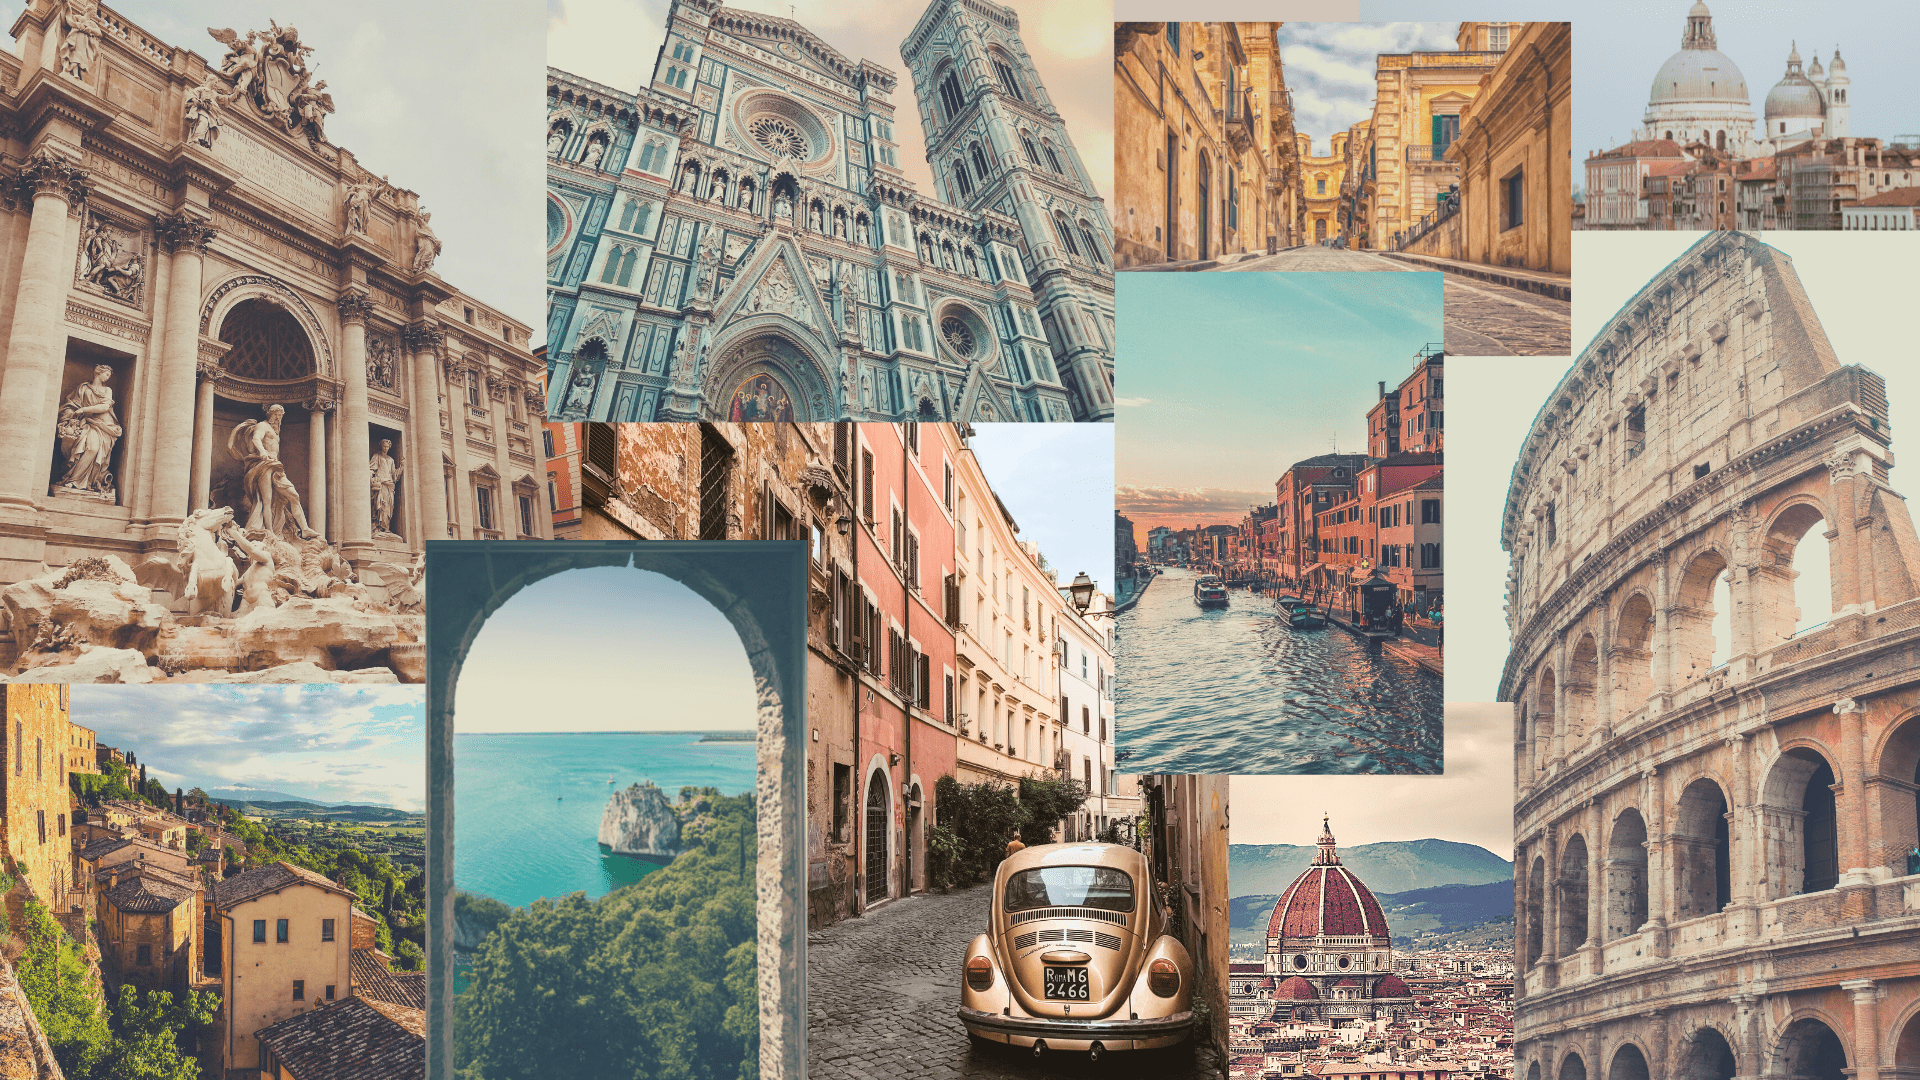 A collage of different European cities including Rome, Florence, and Venice. - Italy